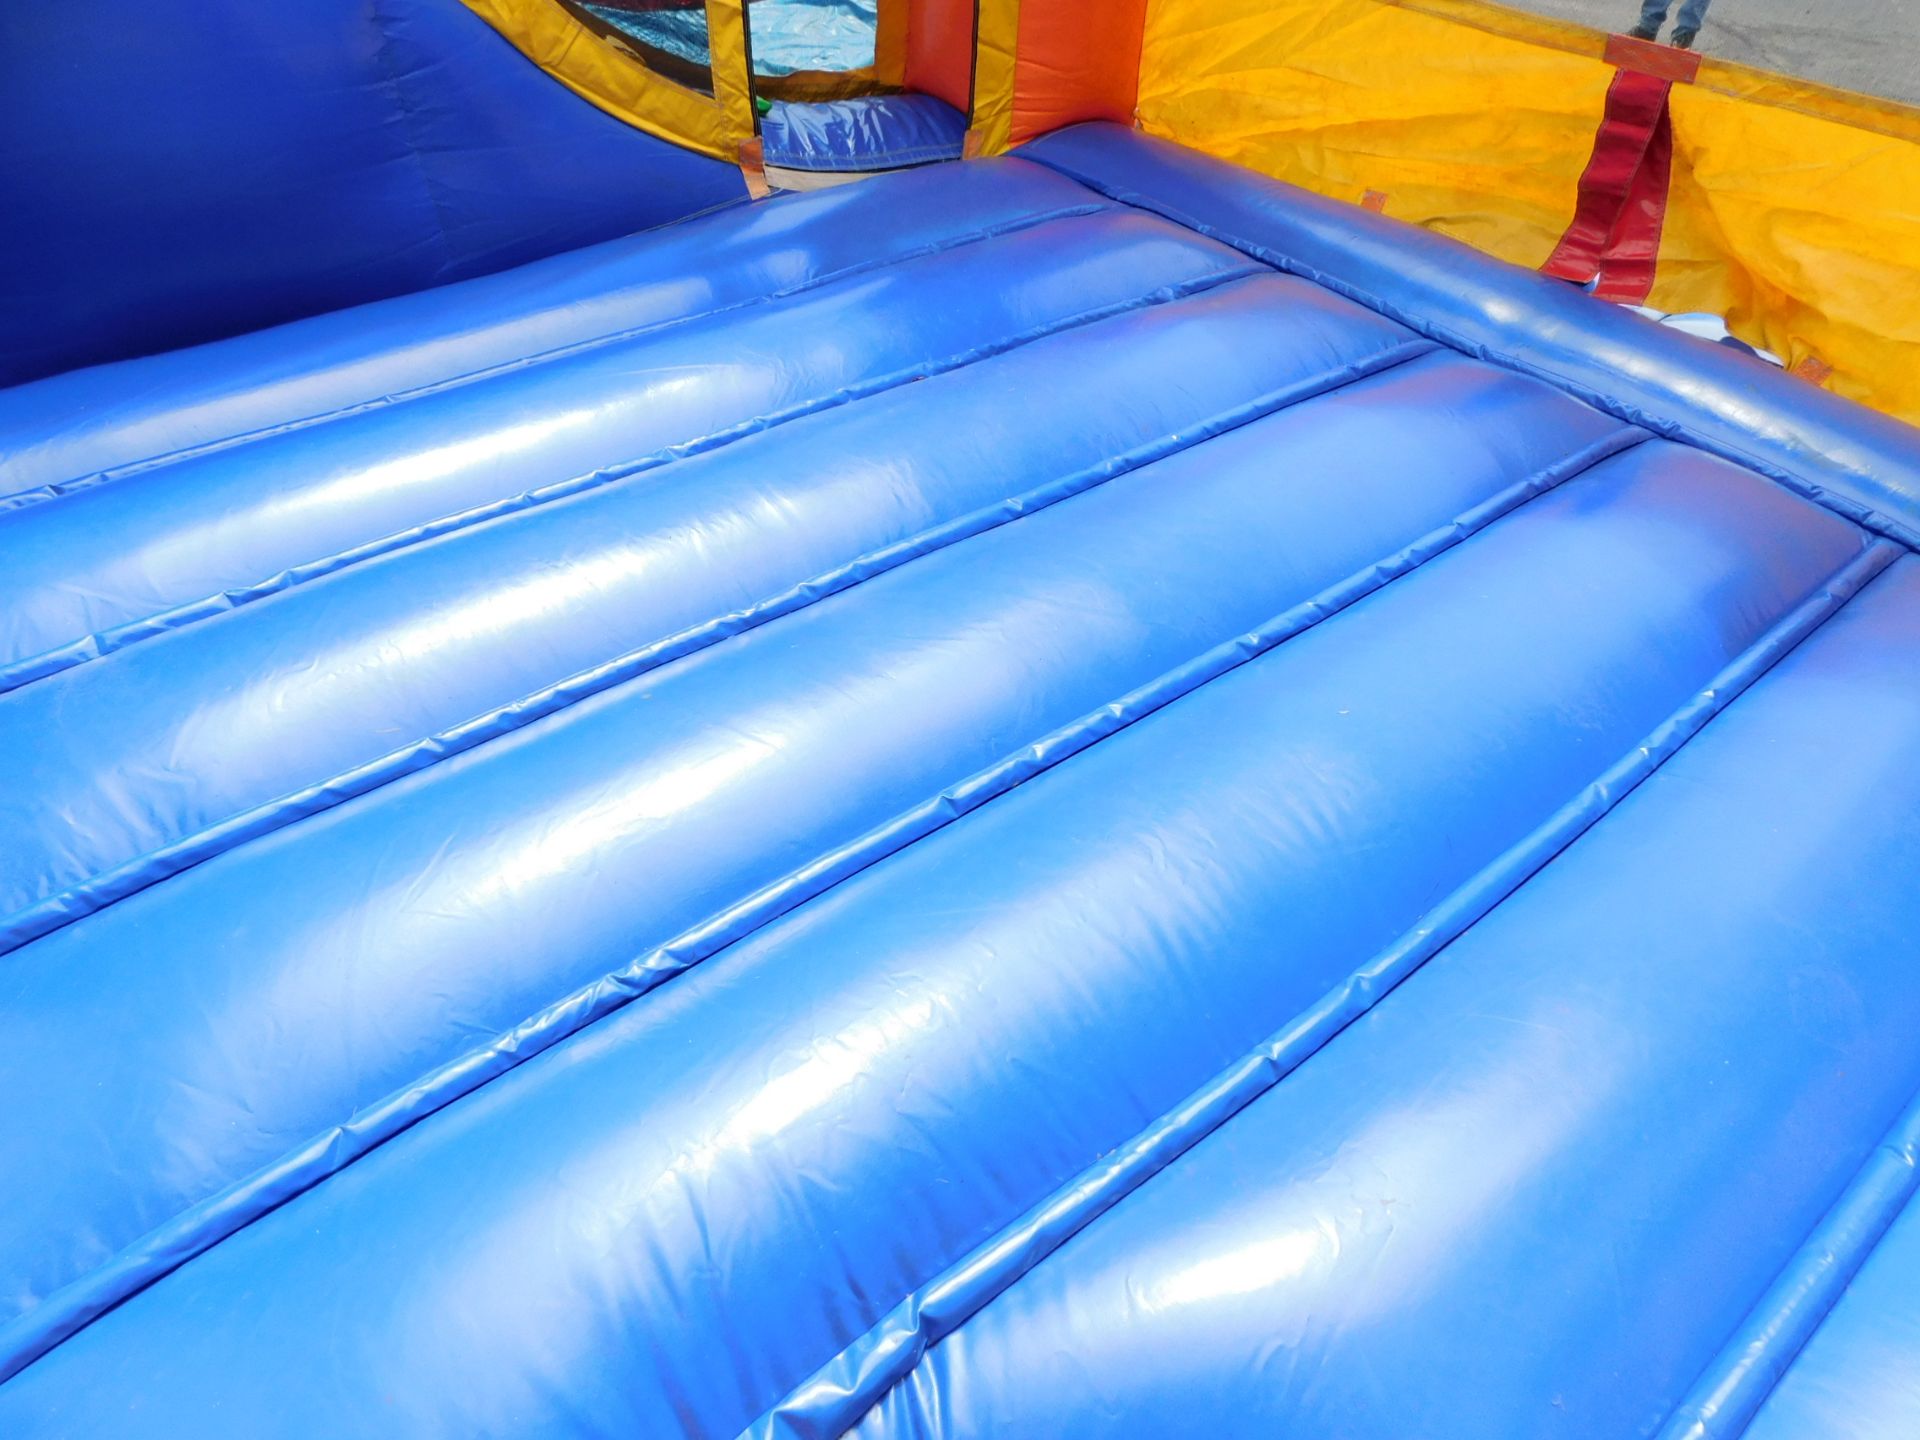 Sports Combo Bounce House w/Slide, 18'WX20'LX14'H, 2 blowers req. - Image 16 of 19